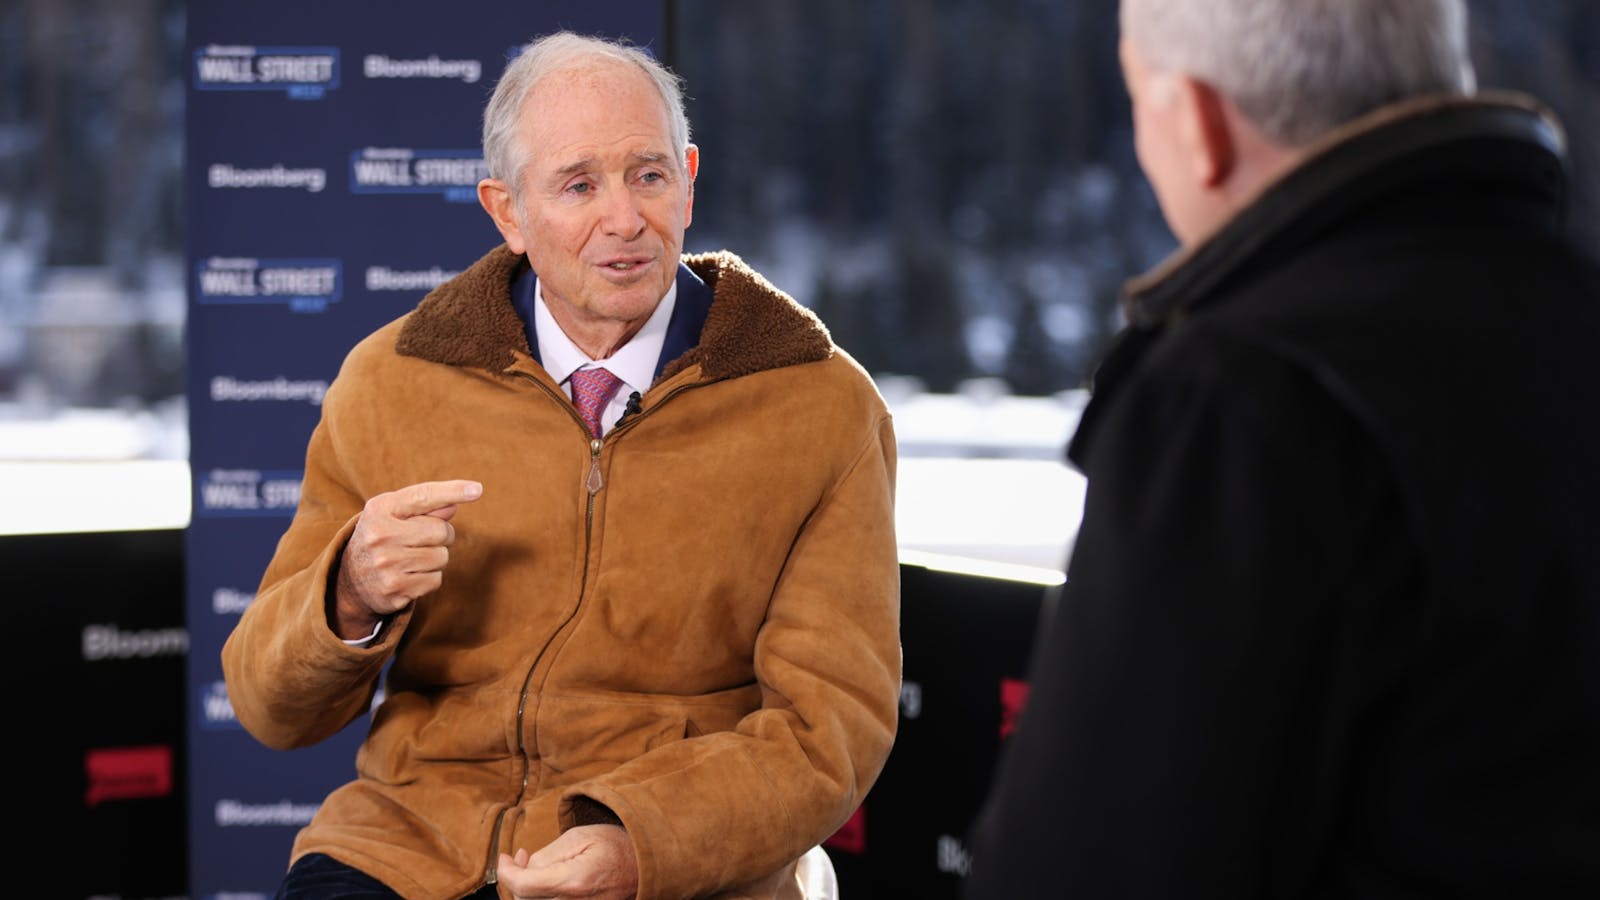 Blackstone CEO Stephen Schwarzman in Davos earlier this year. Photo by Bloomberg.